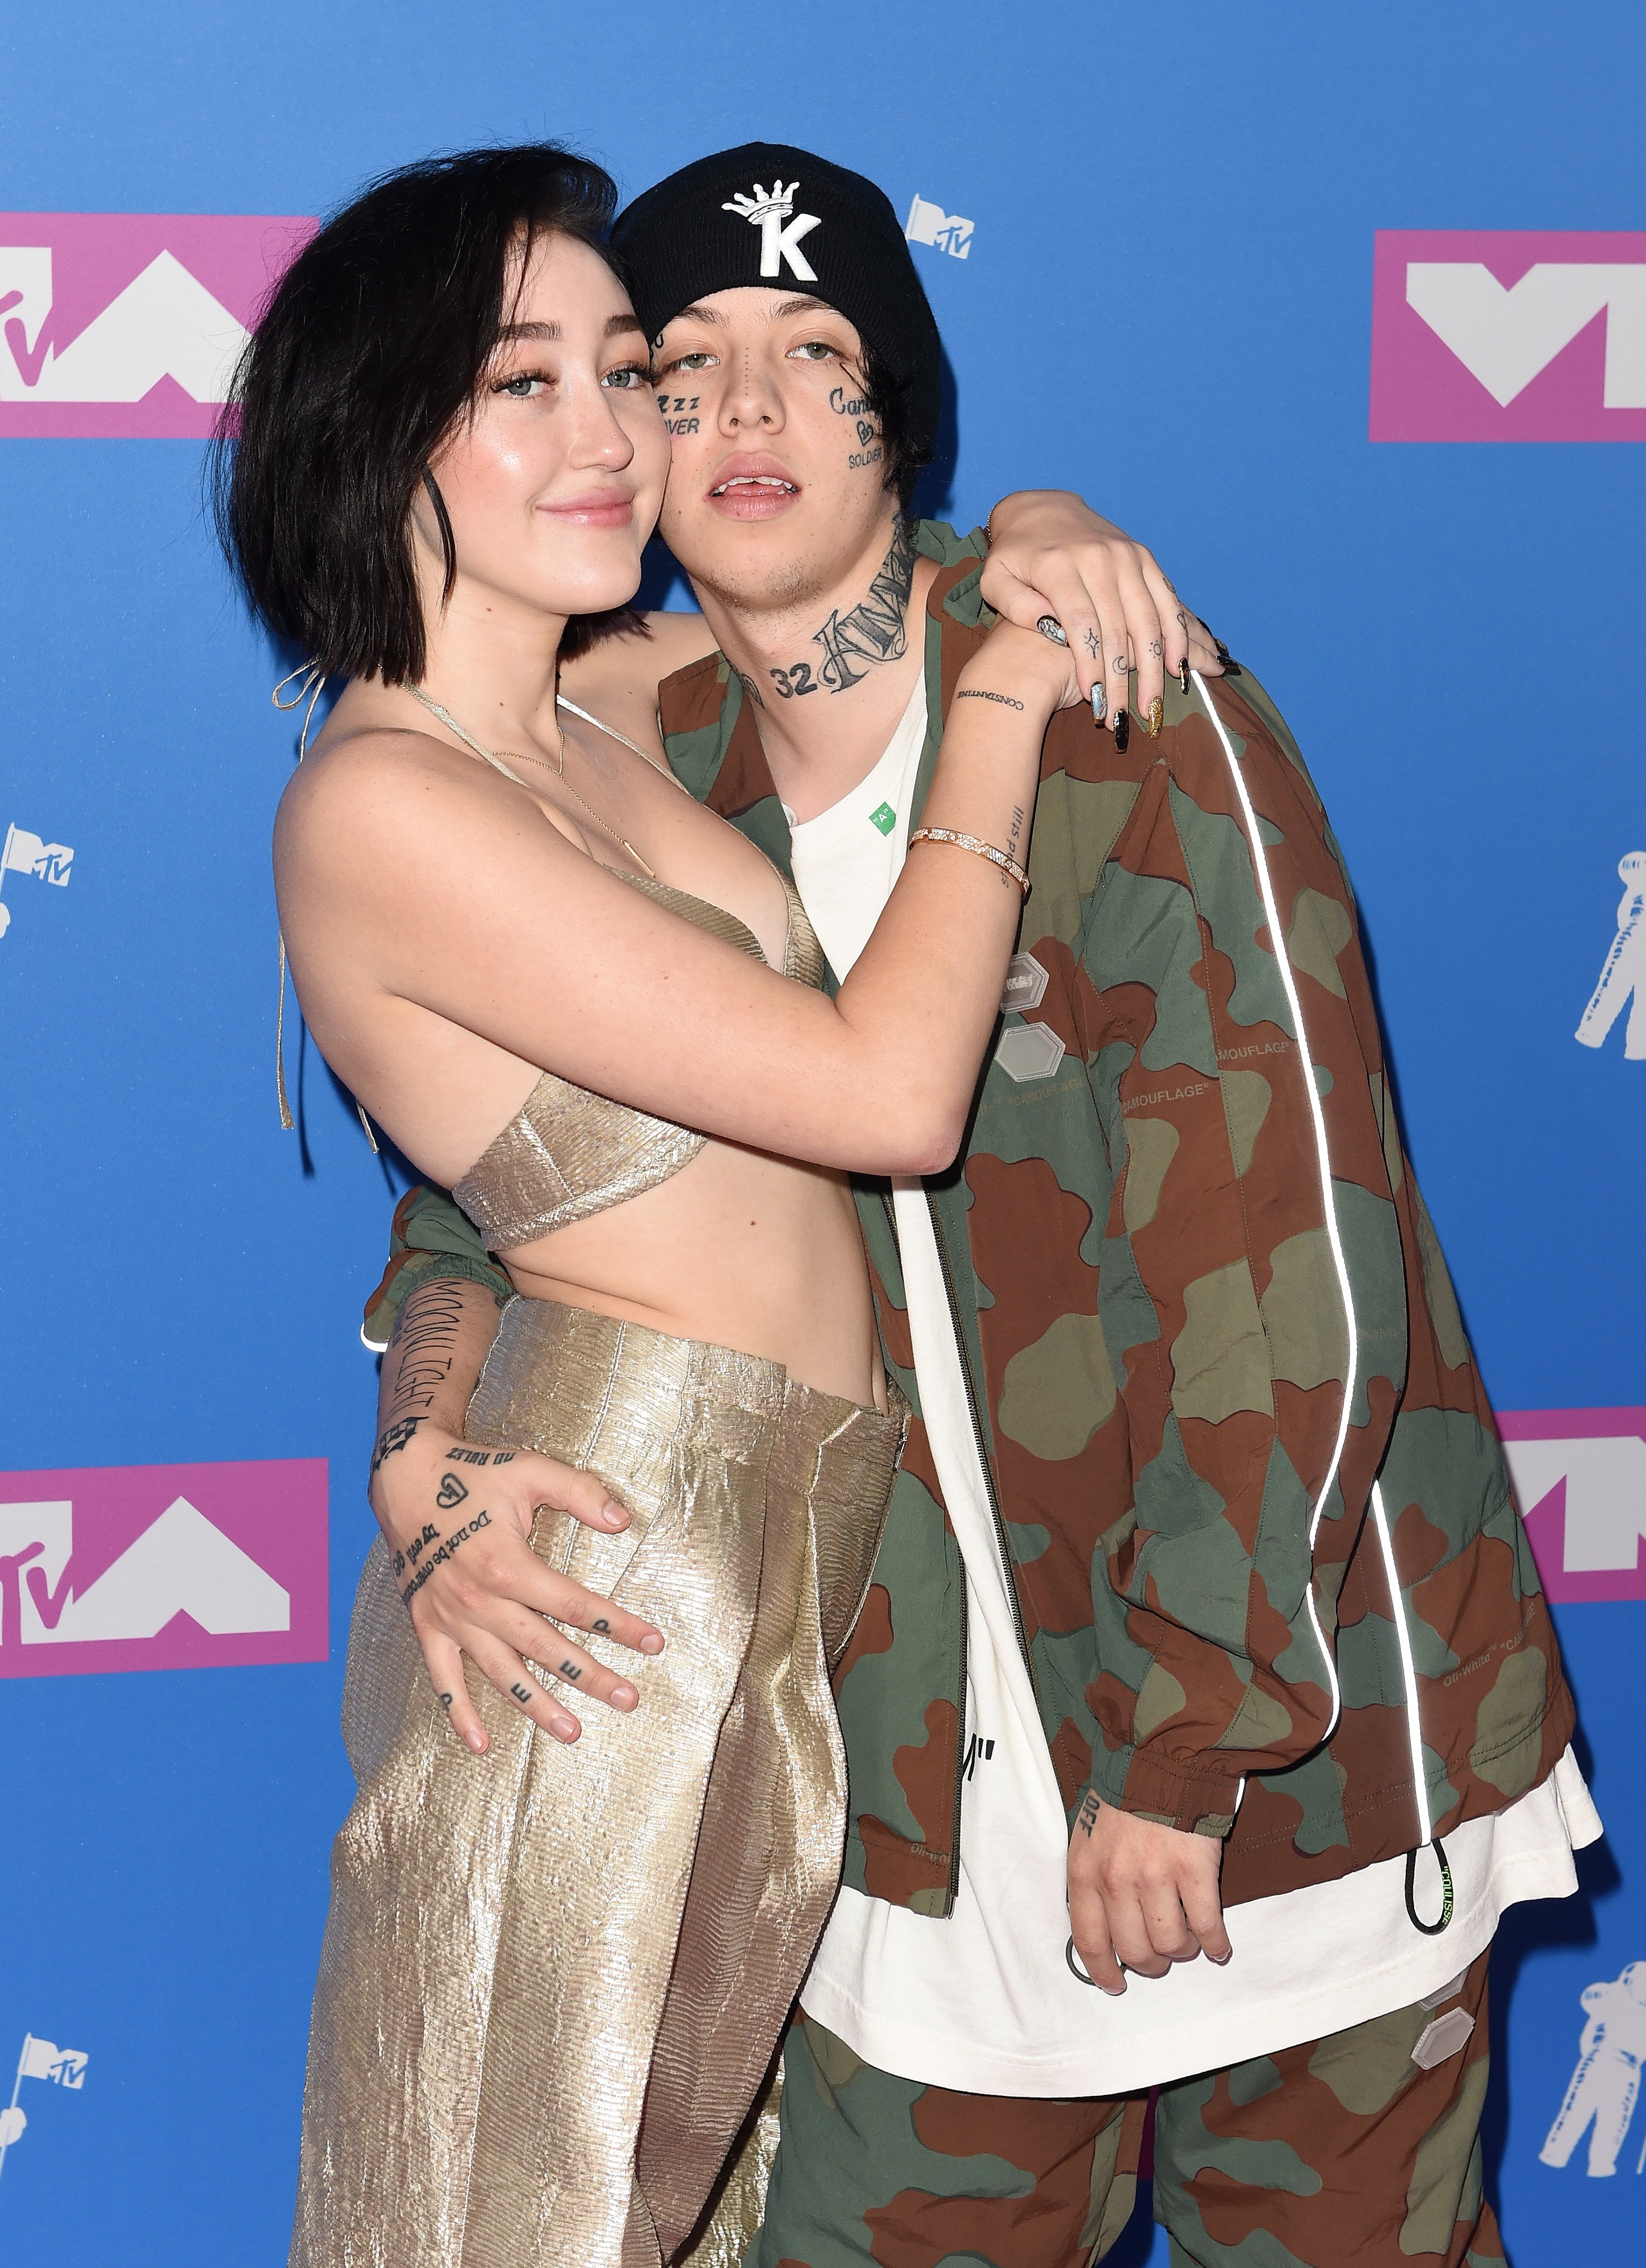 Noah Cyrus and Lil Xan attend the 2018 MTV Video Music Awards at Radio City Music Hall on August 20, 2018 in New York City | Source: Getty Images